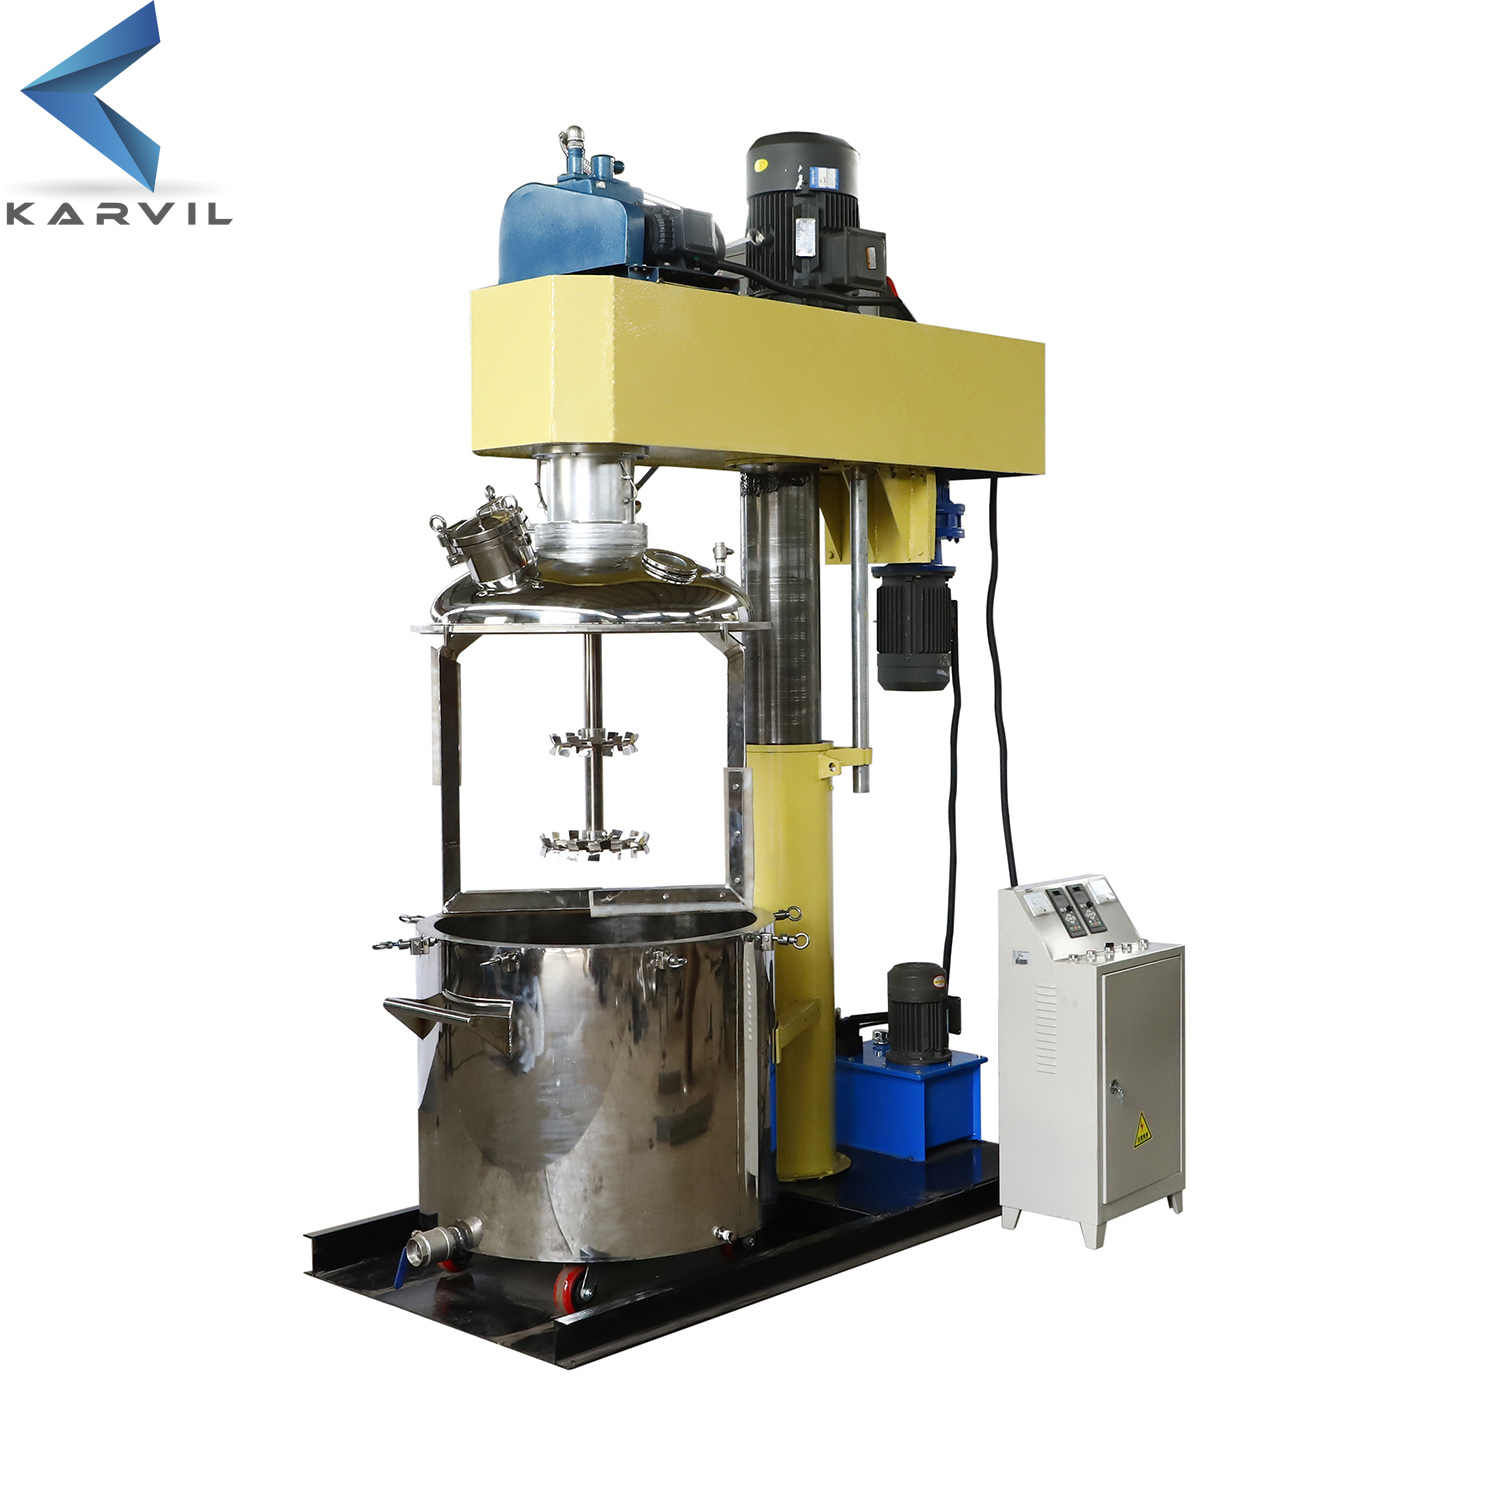 KARVIL 500L mulit-function strontg disperser machine with hudraulic discharge machine 